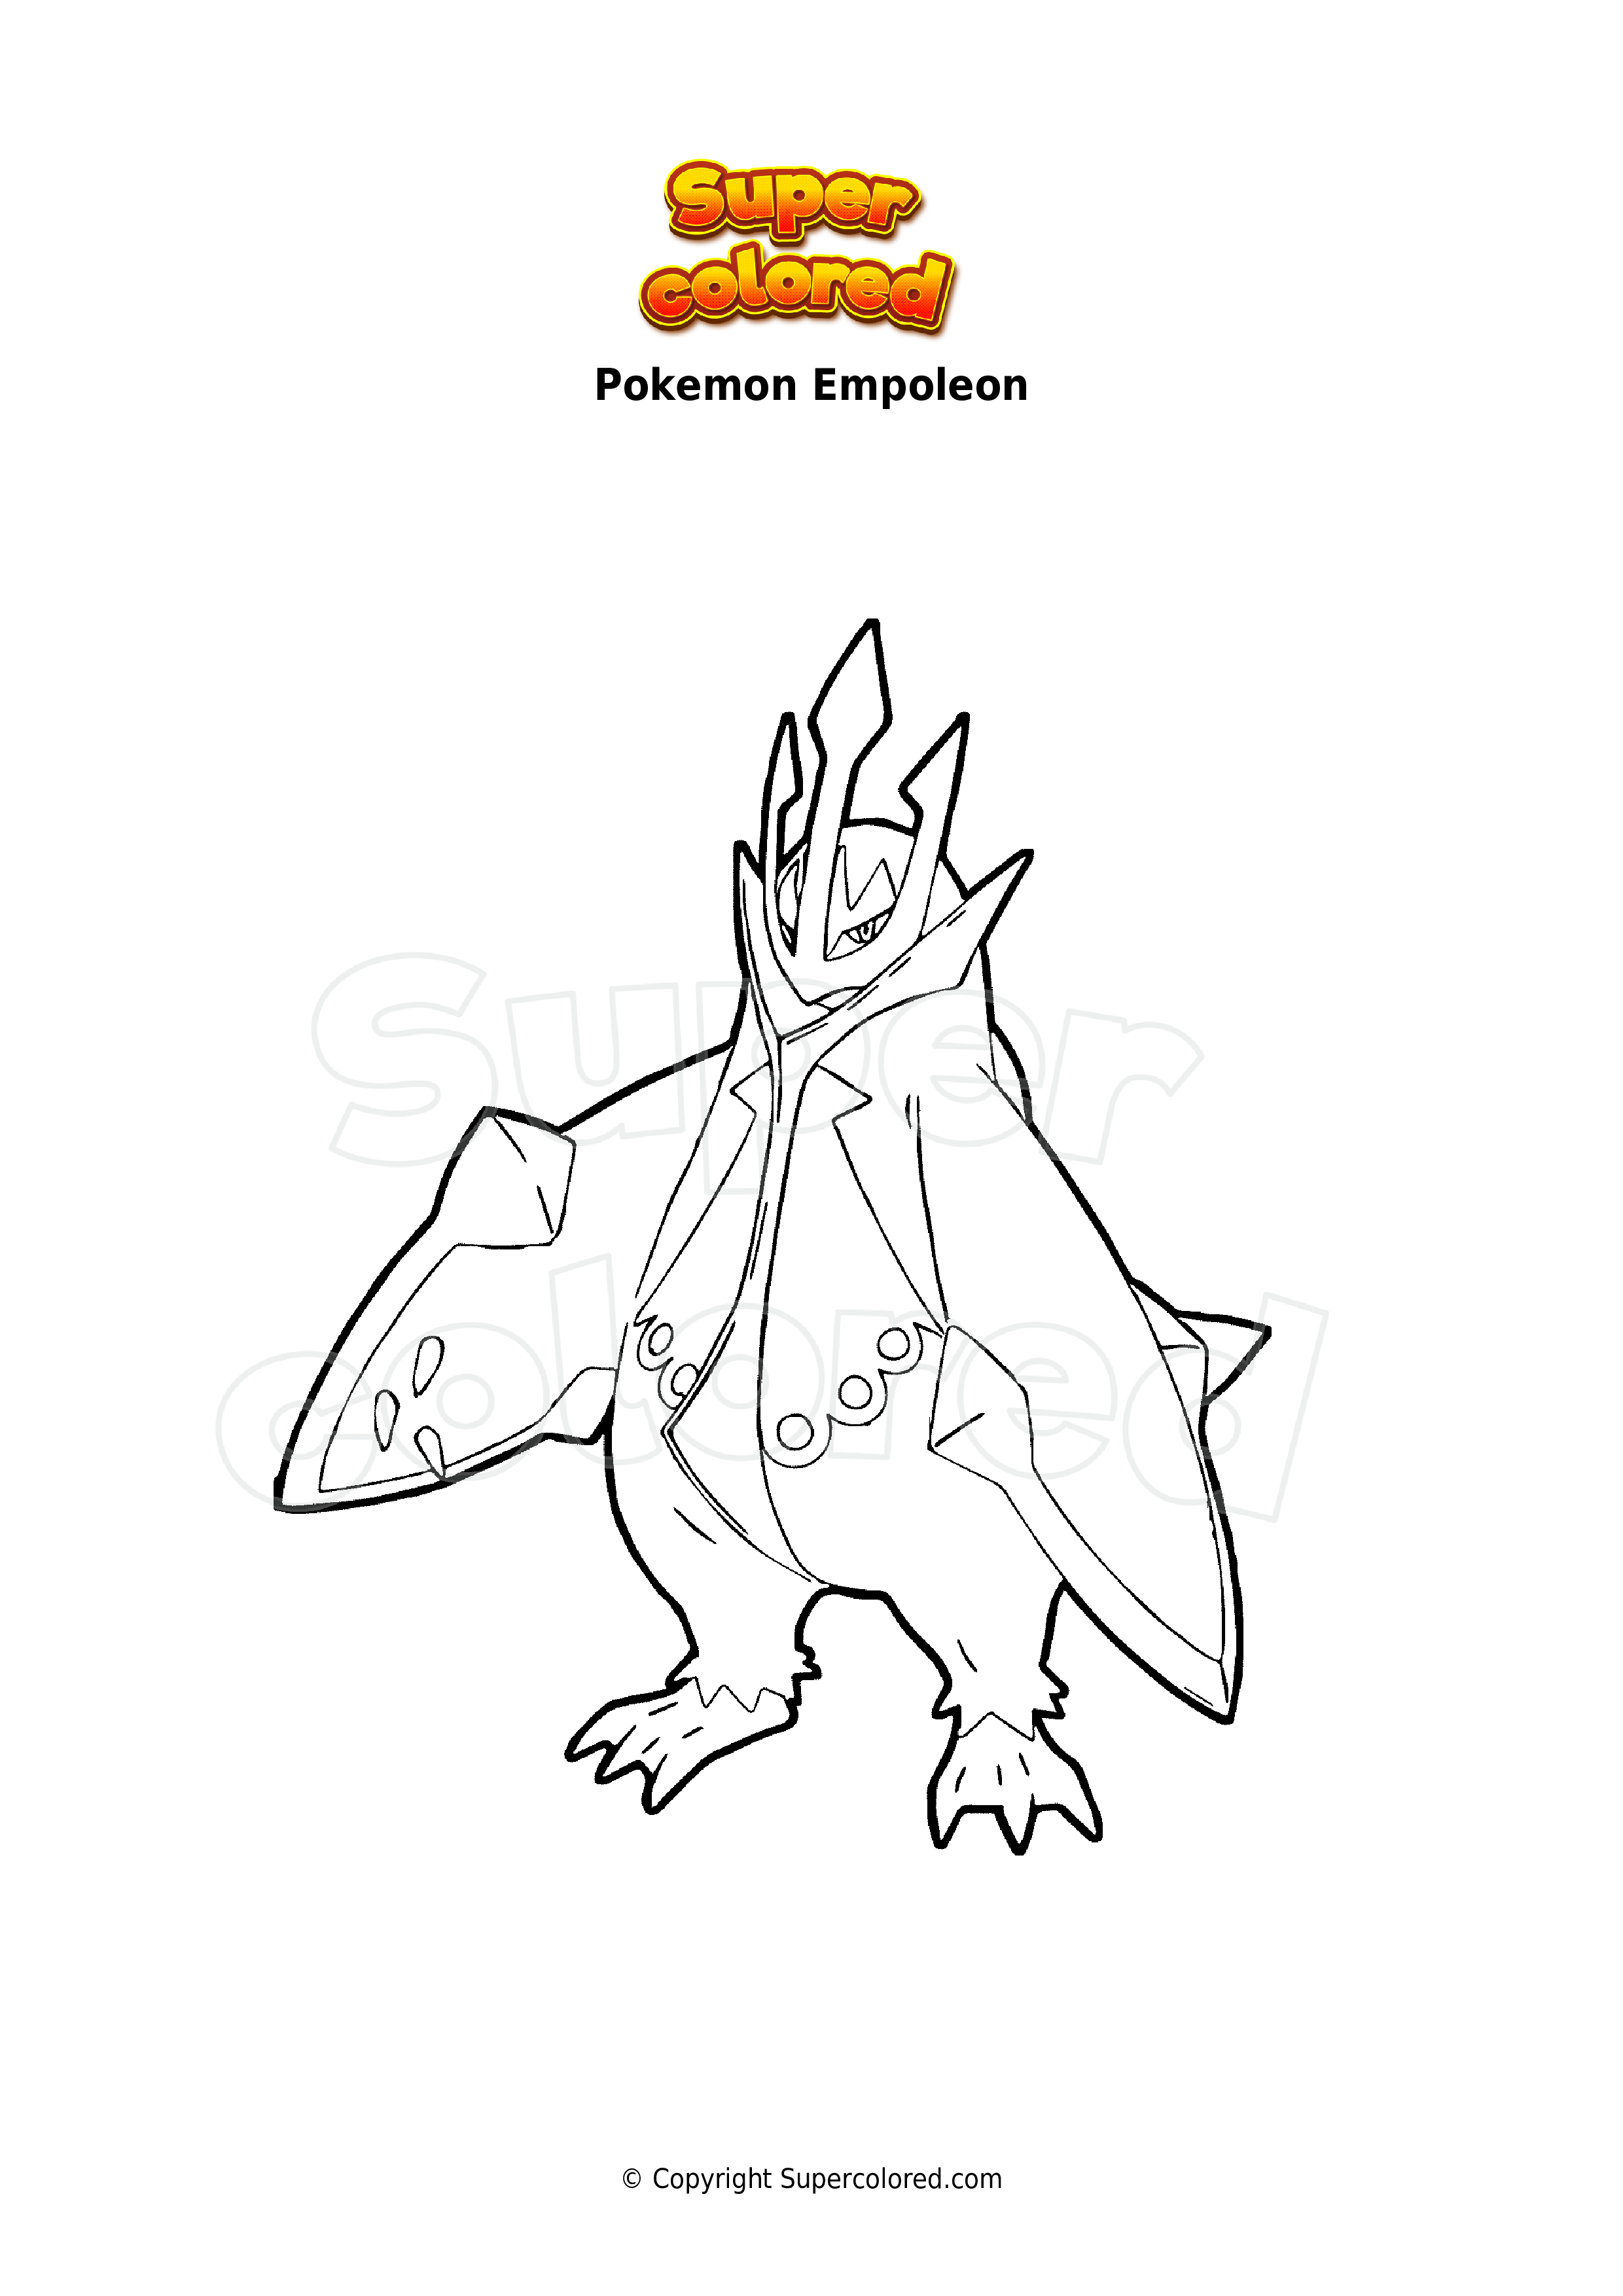 413 Cartoon Pokemon Empoleon Coloring Pages with Printable